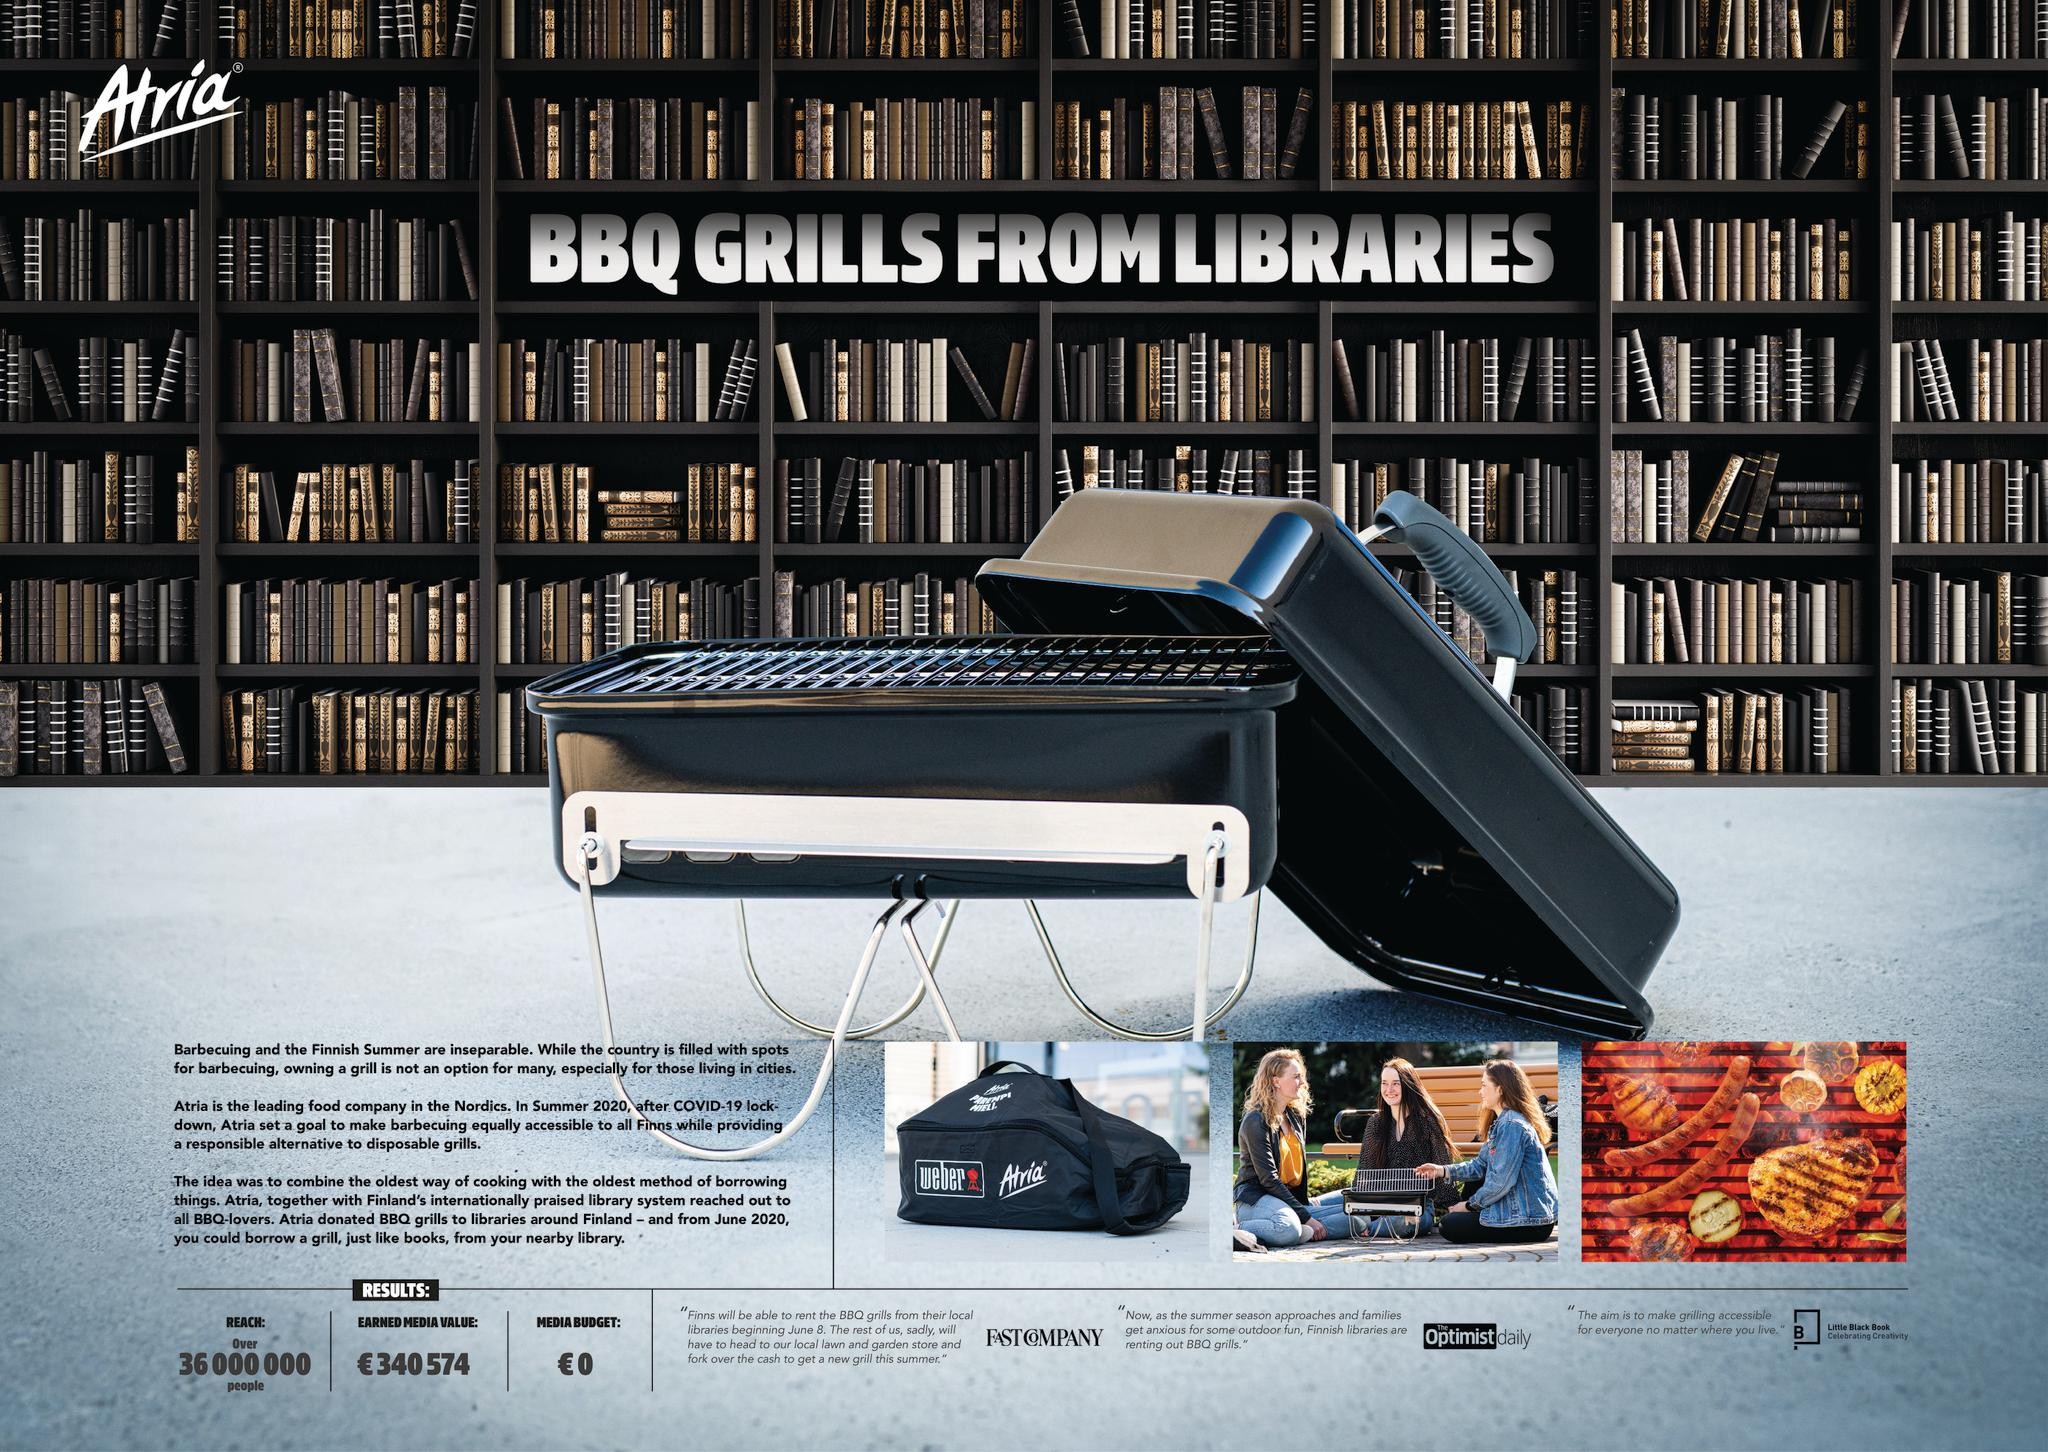 BBQ grills from libraries